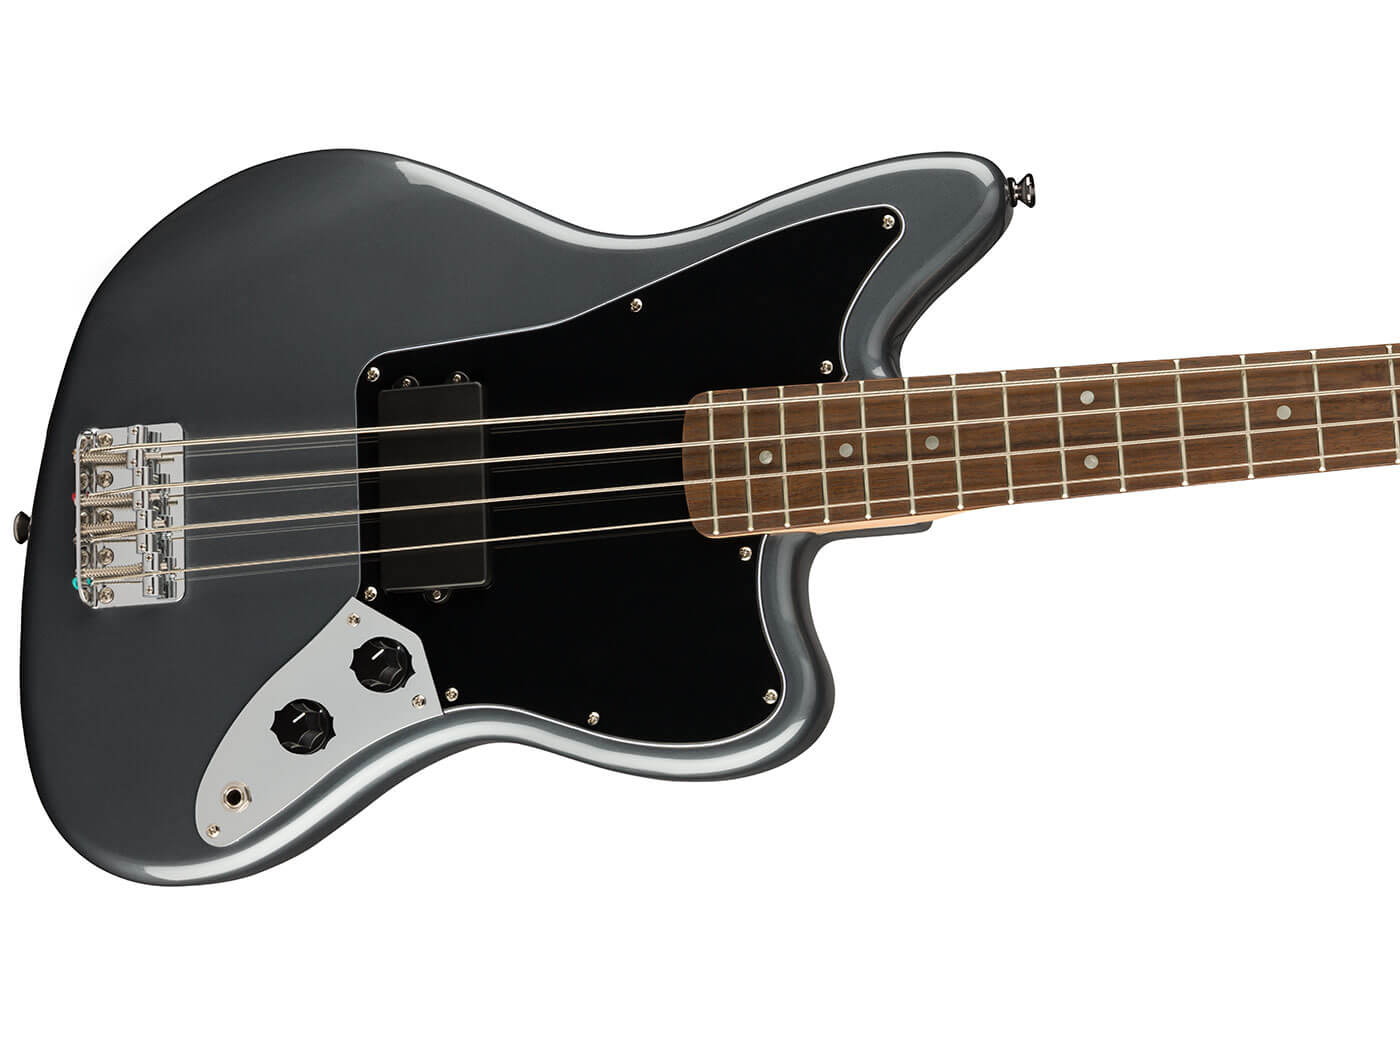 The Affinity Jag Bass